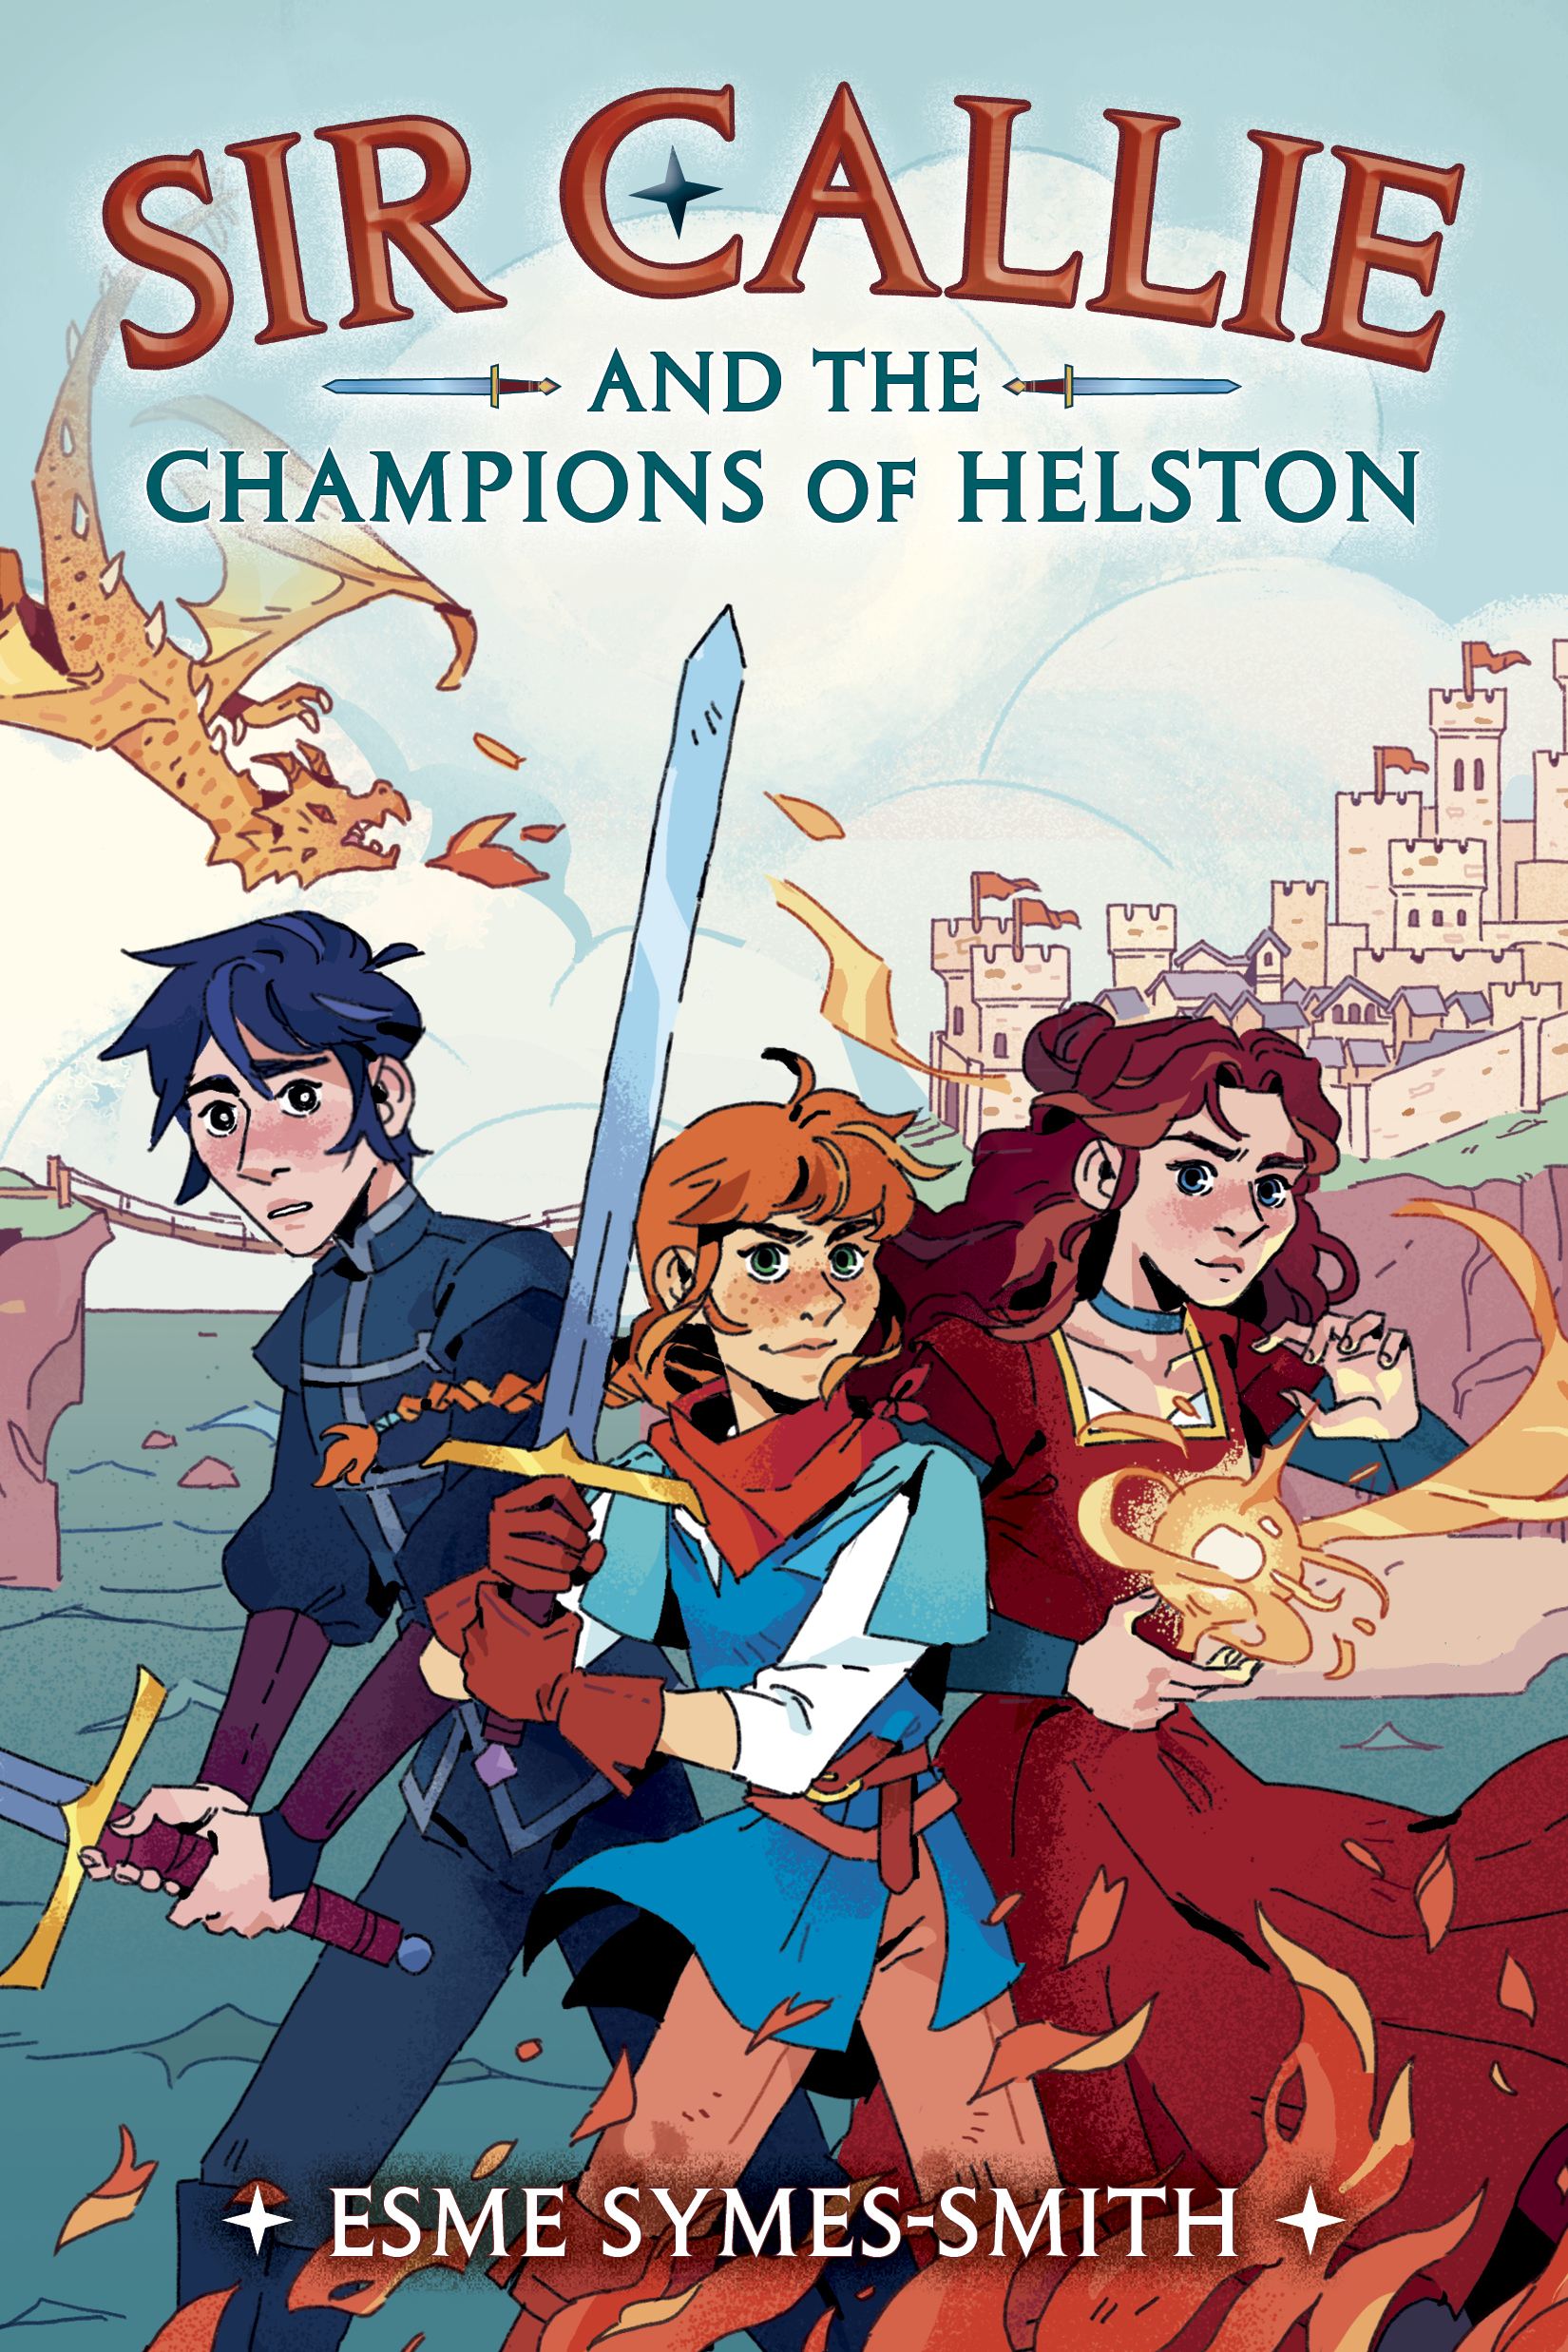 Image for "Sir Callie and the Champions of Helston"